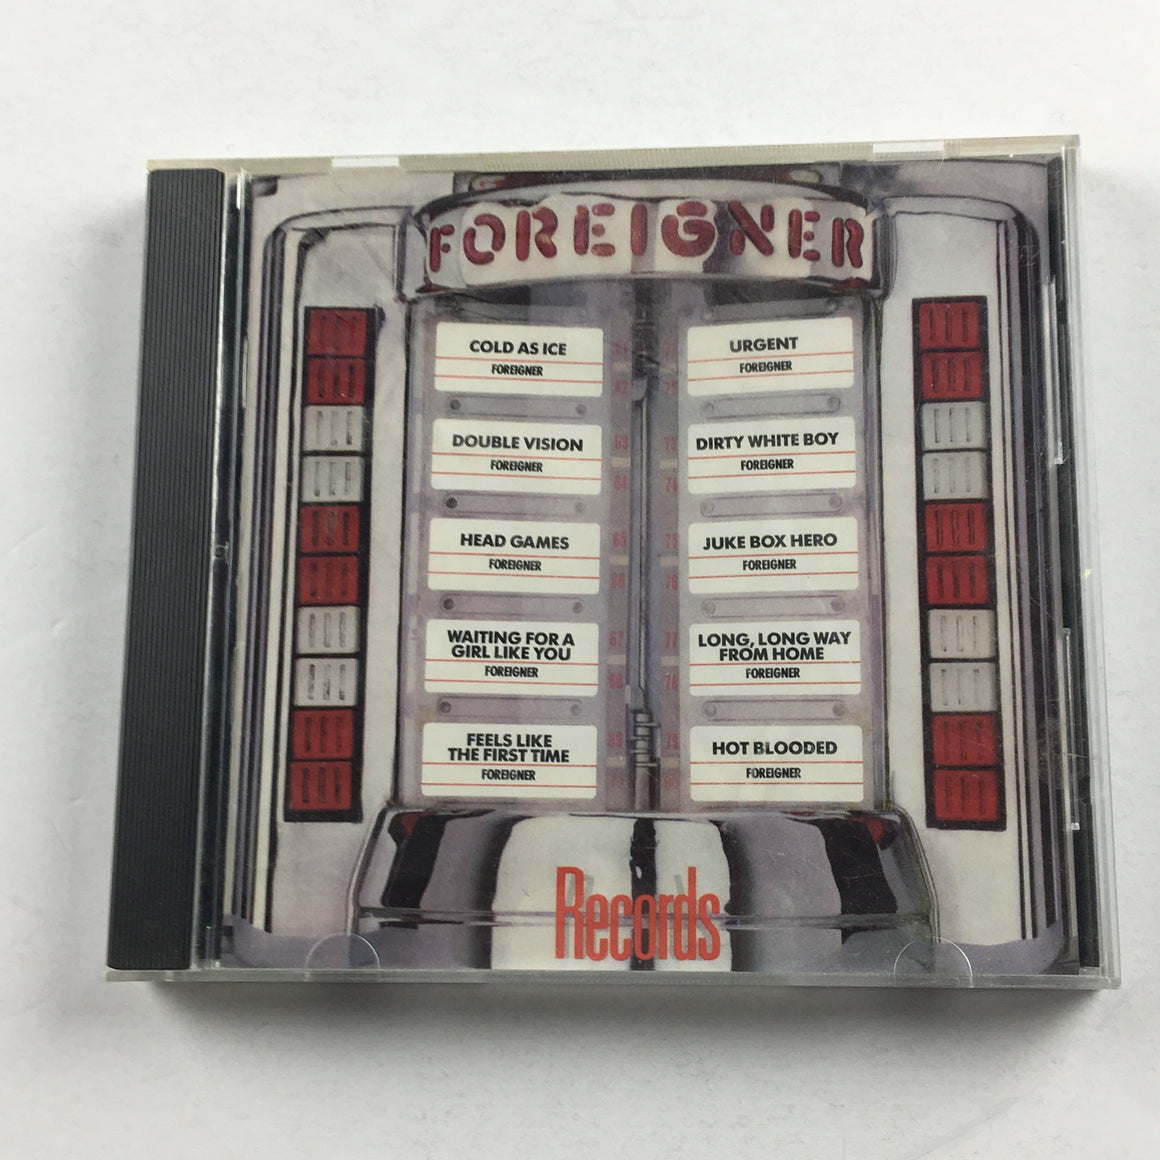 Foreigner Records Used CD VG+\VG+